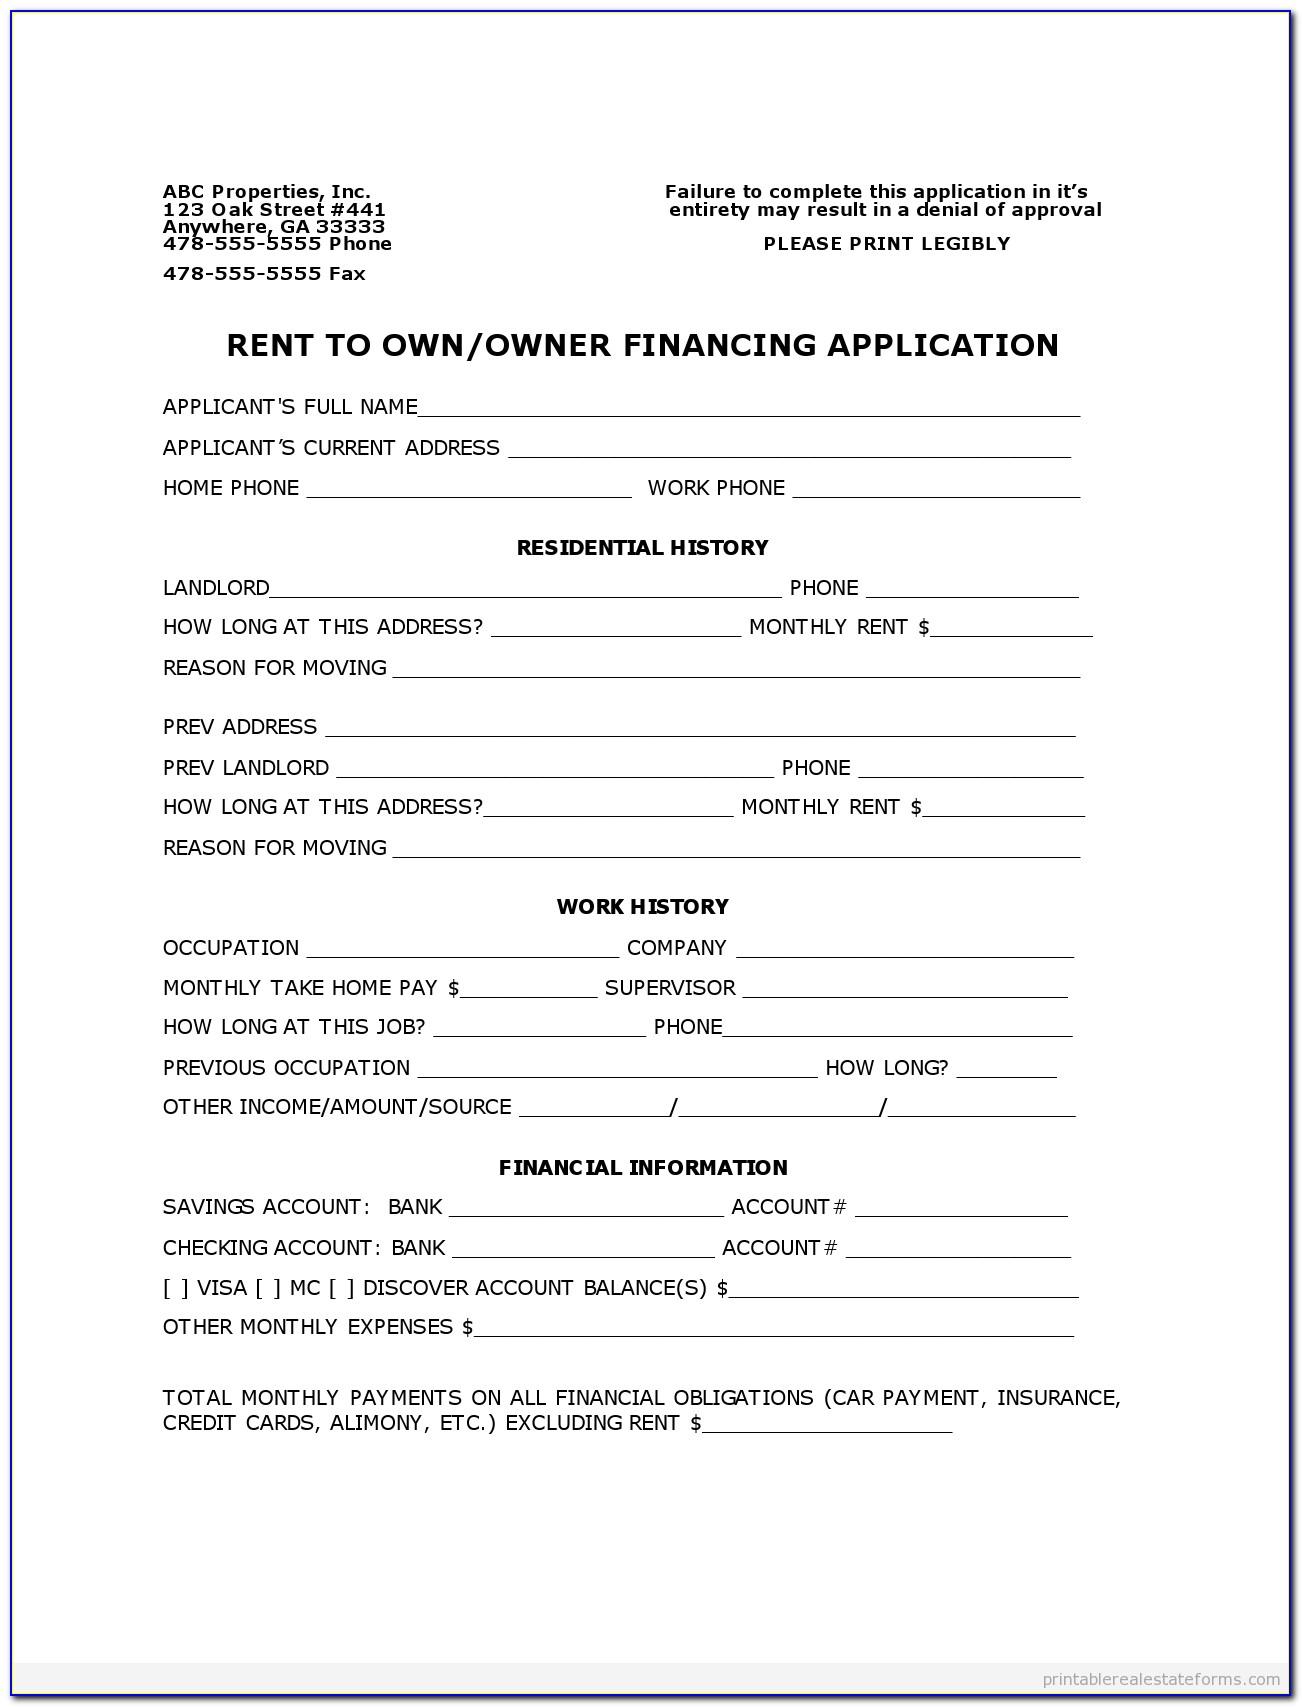 Owner Financing Contract Forms